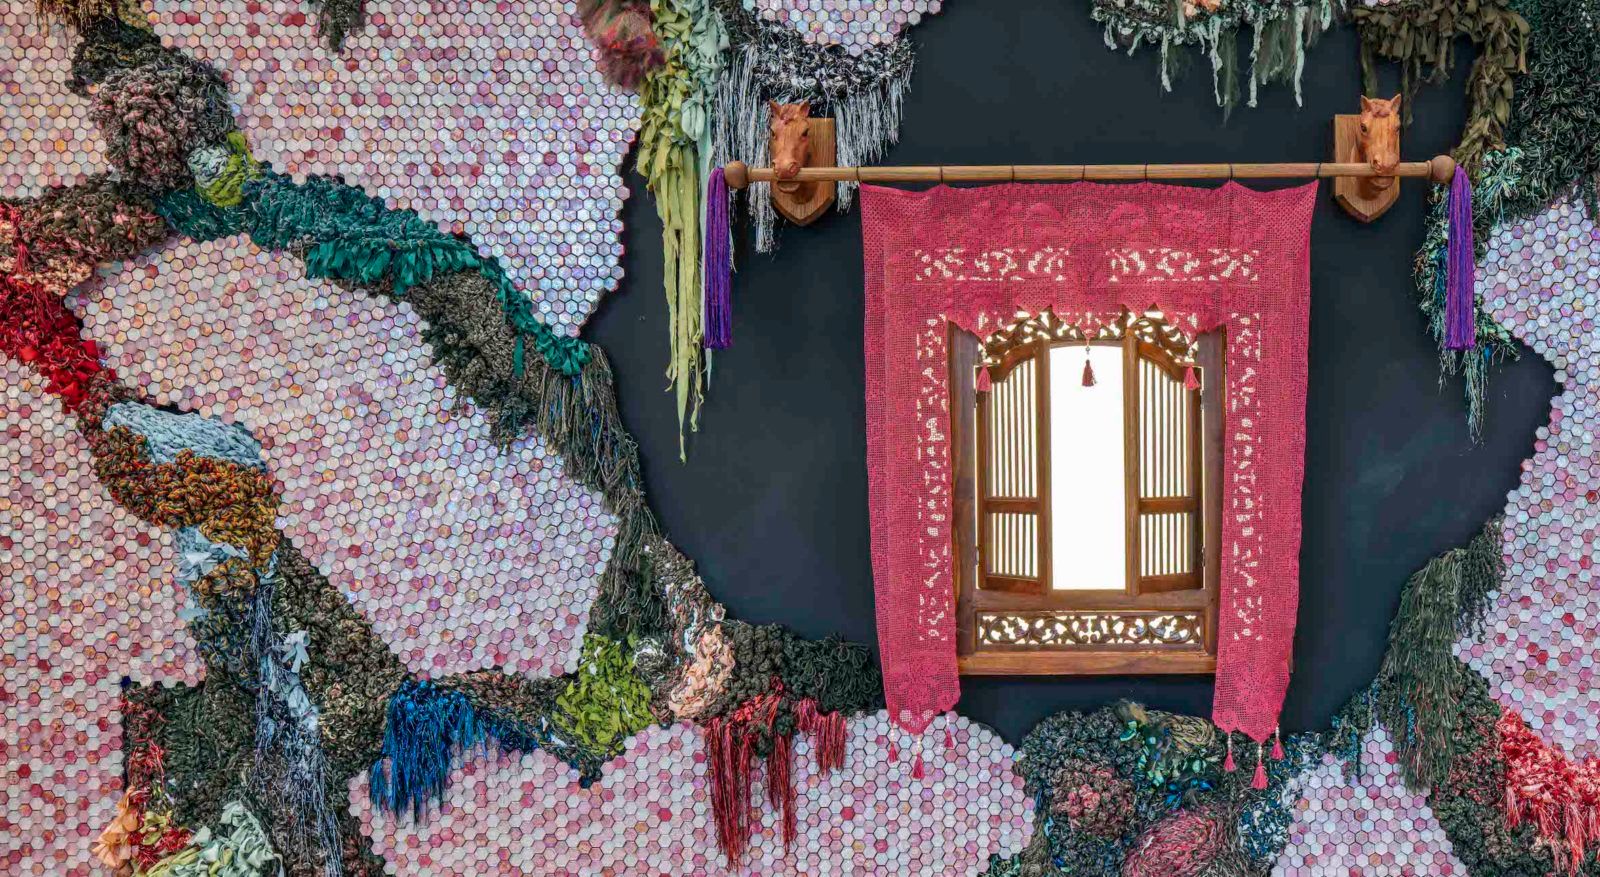 Why Gucci’s crochet art wall by Kelly Limerick deserves a closer look